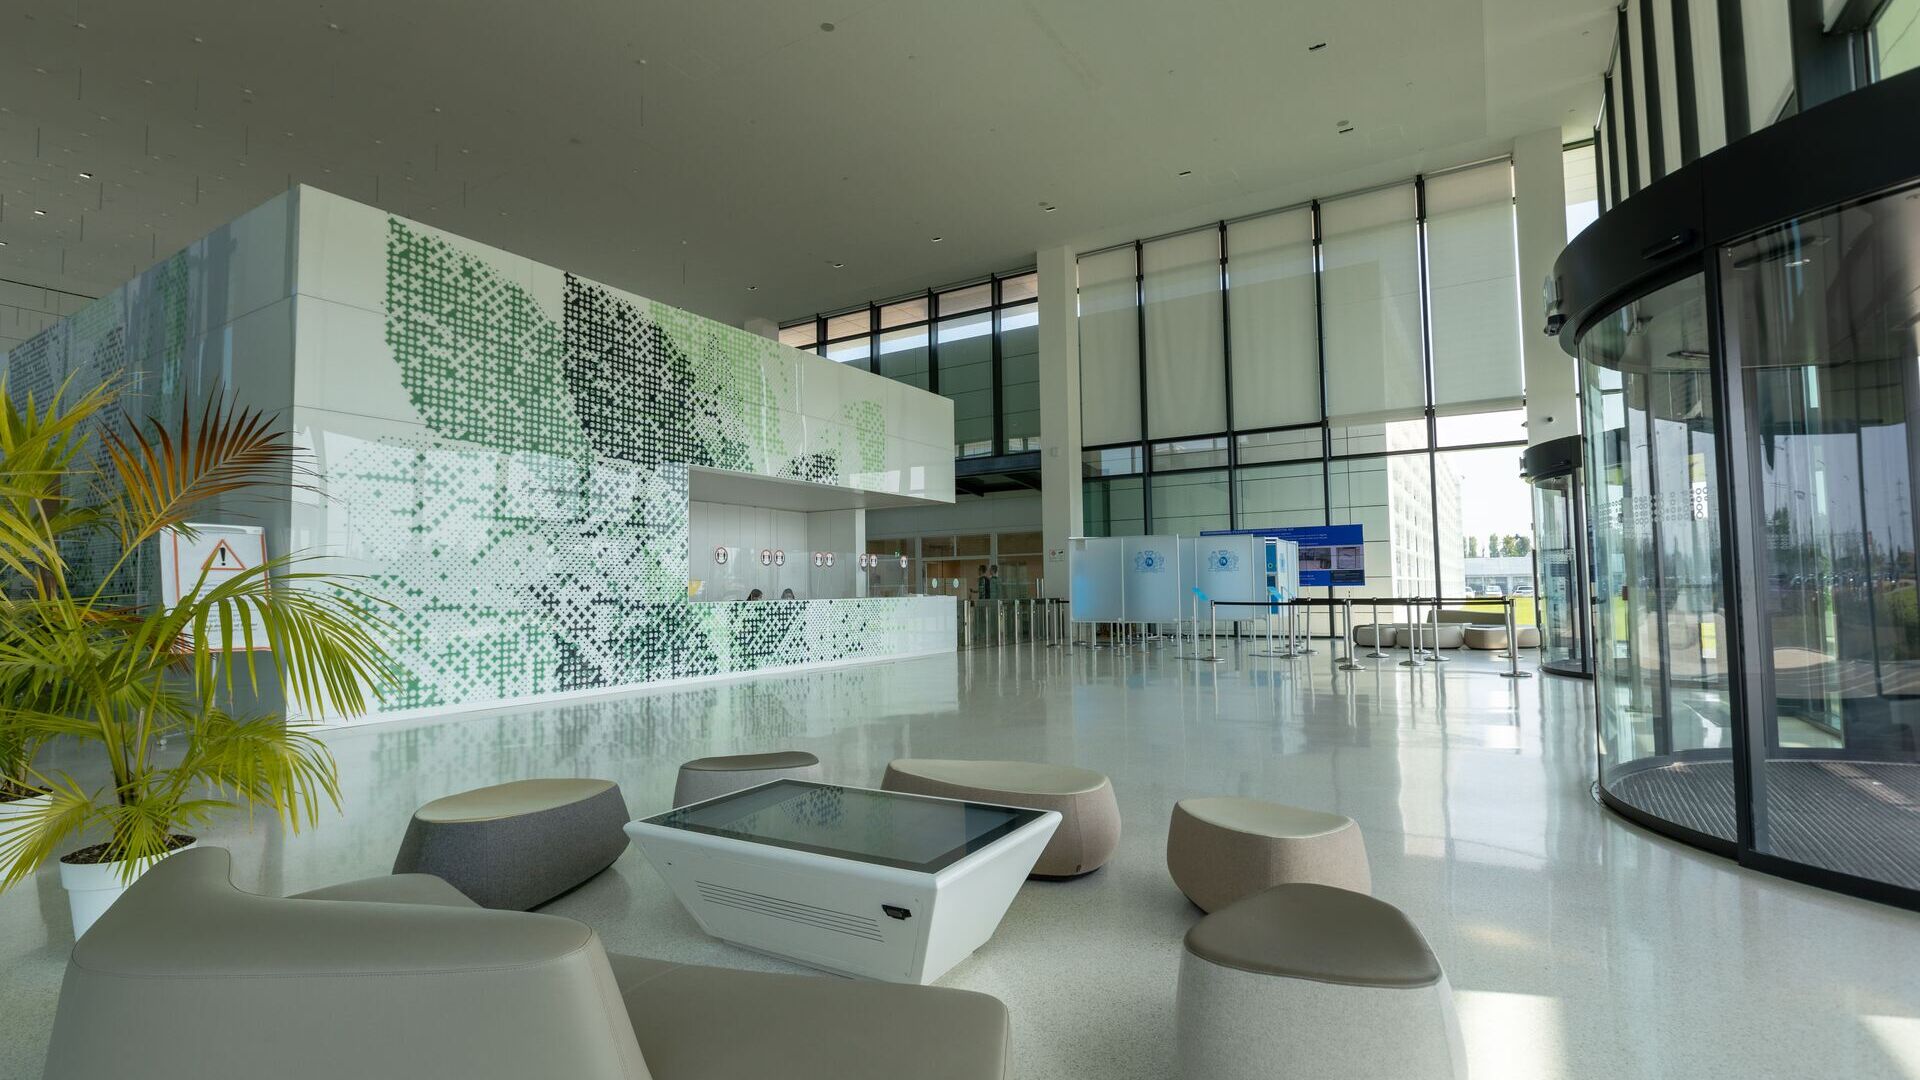 Philip Morris: the interior of the entrance to the Philip Morris Manufacturing and Technology Bologna in Crespellano in Emilia-Romagna